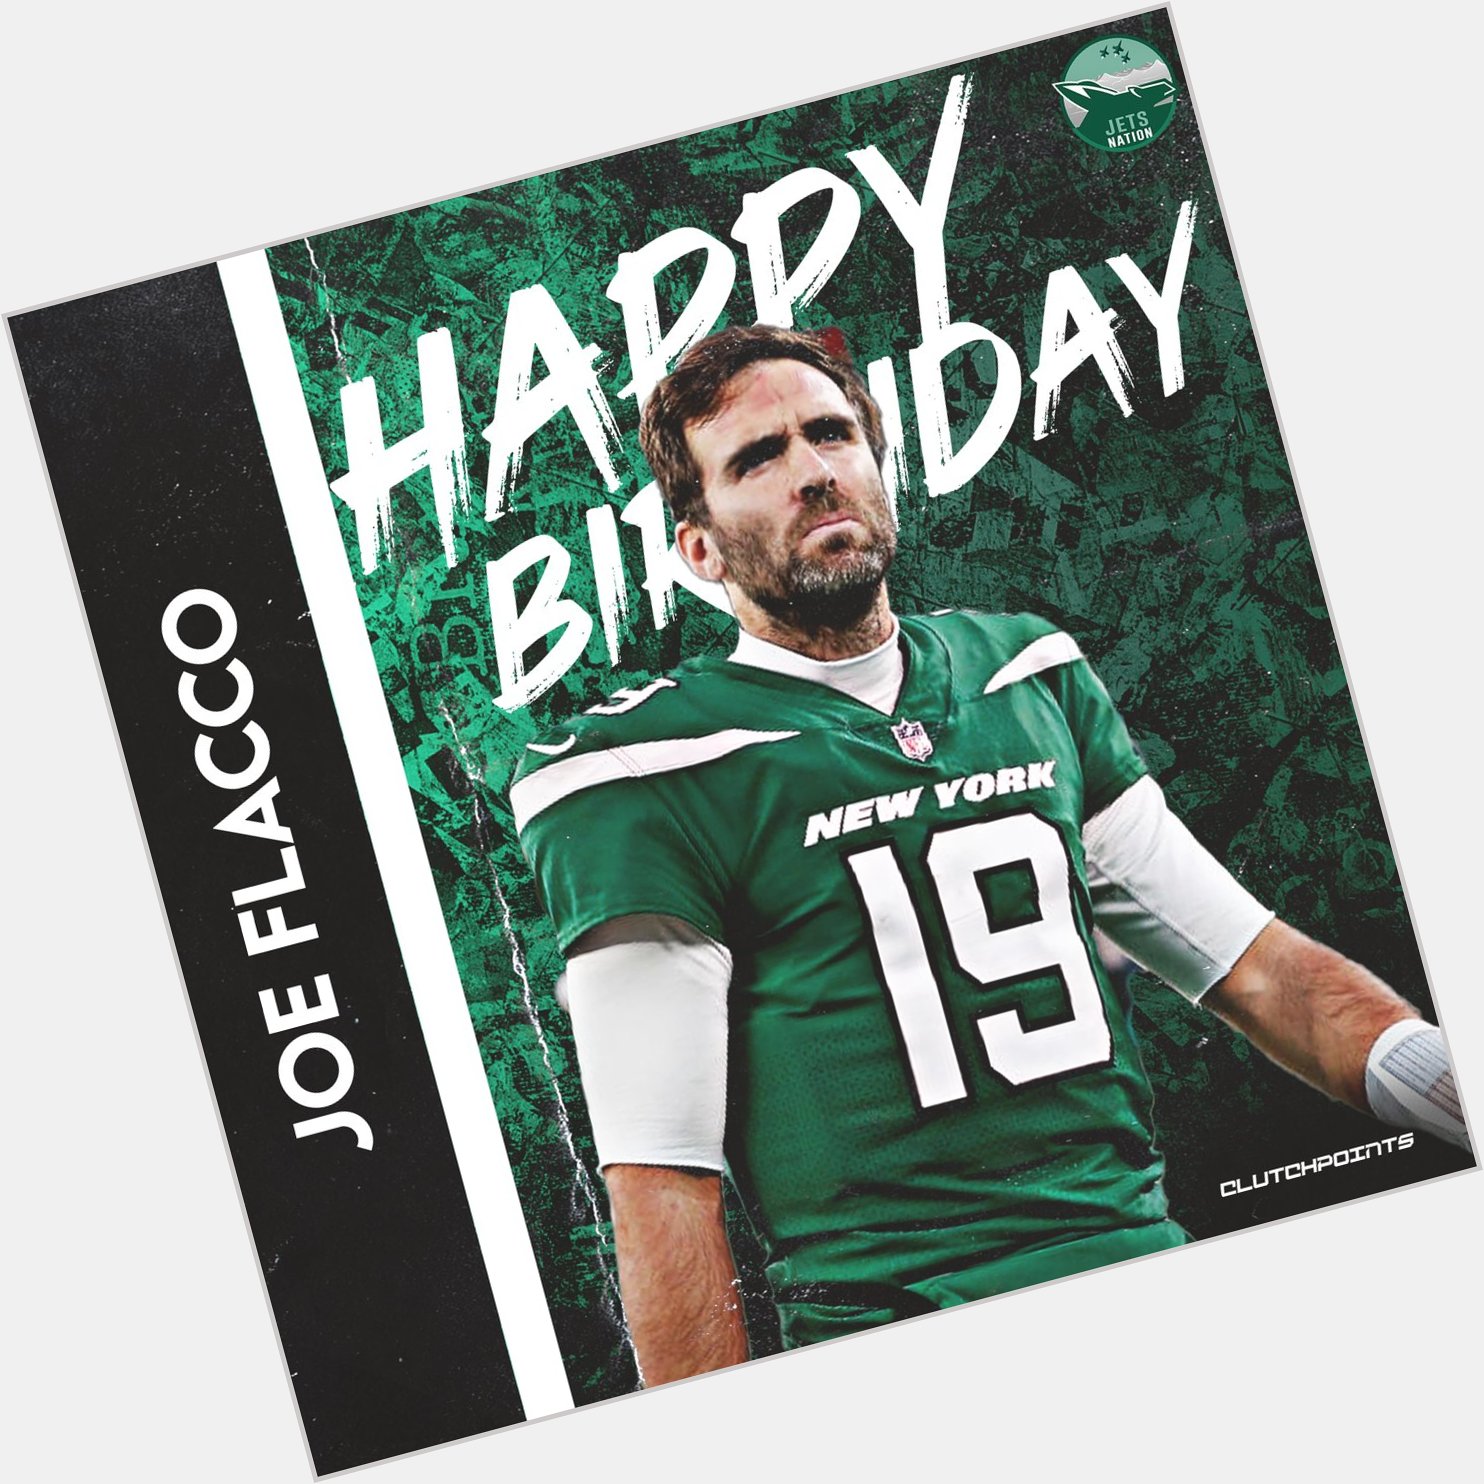 Join Jets Nation in greeting Joe Flacco a happy 37th birthday!  